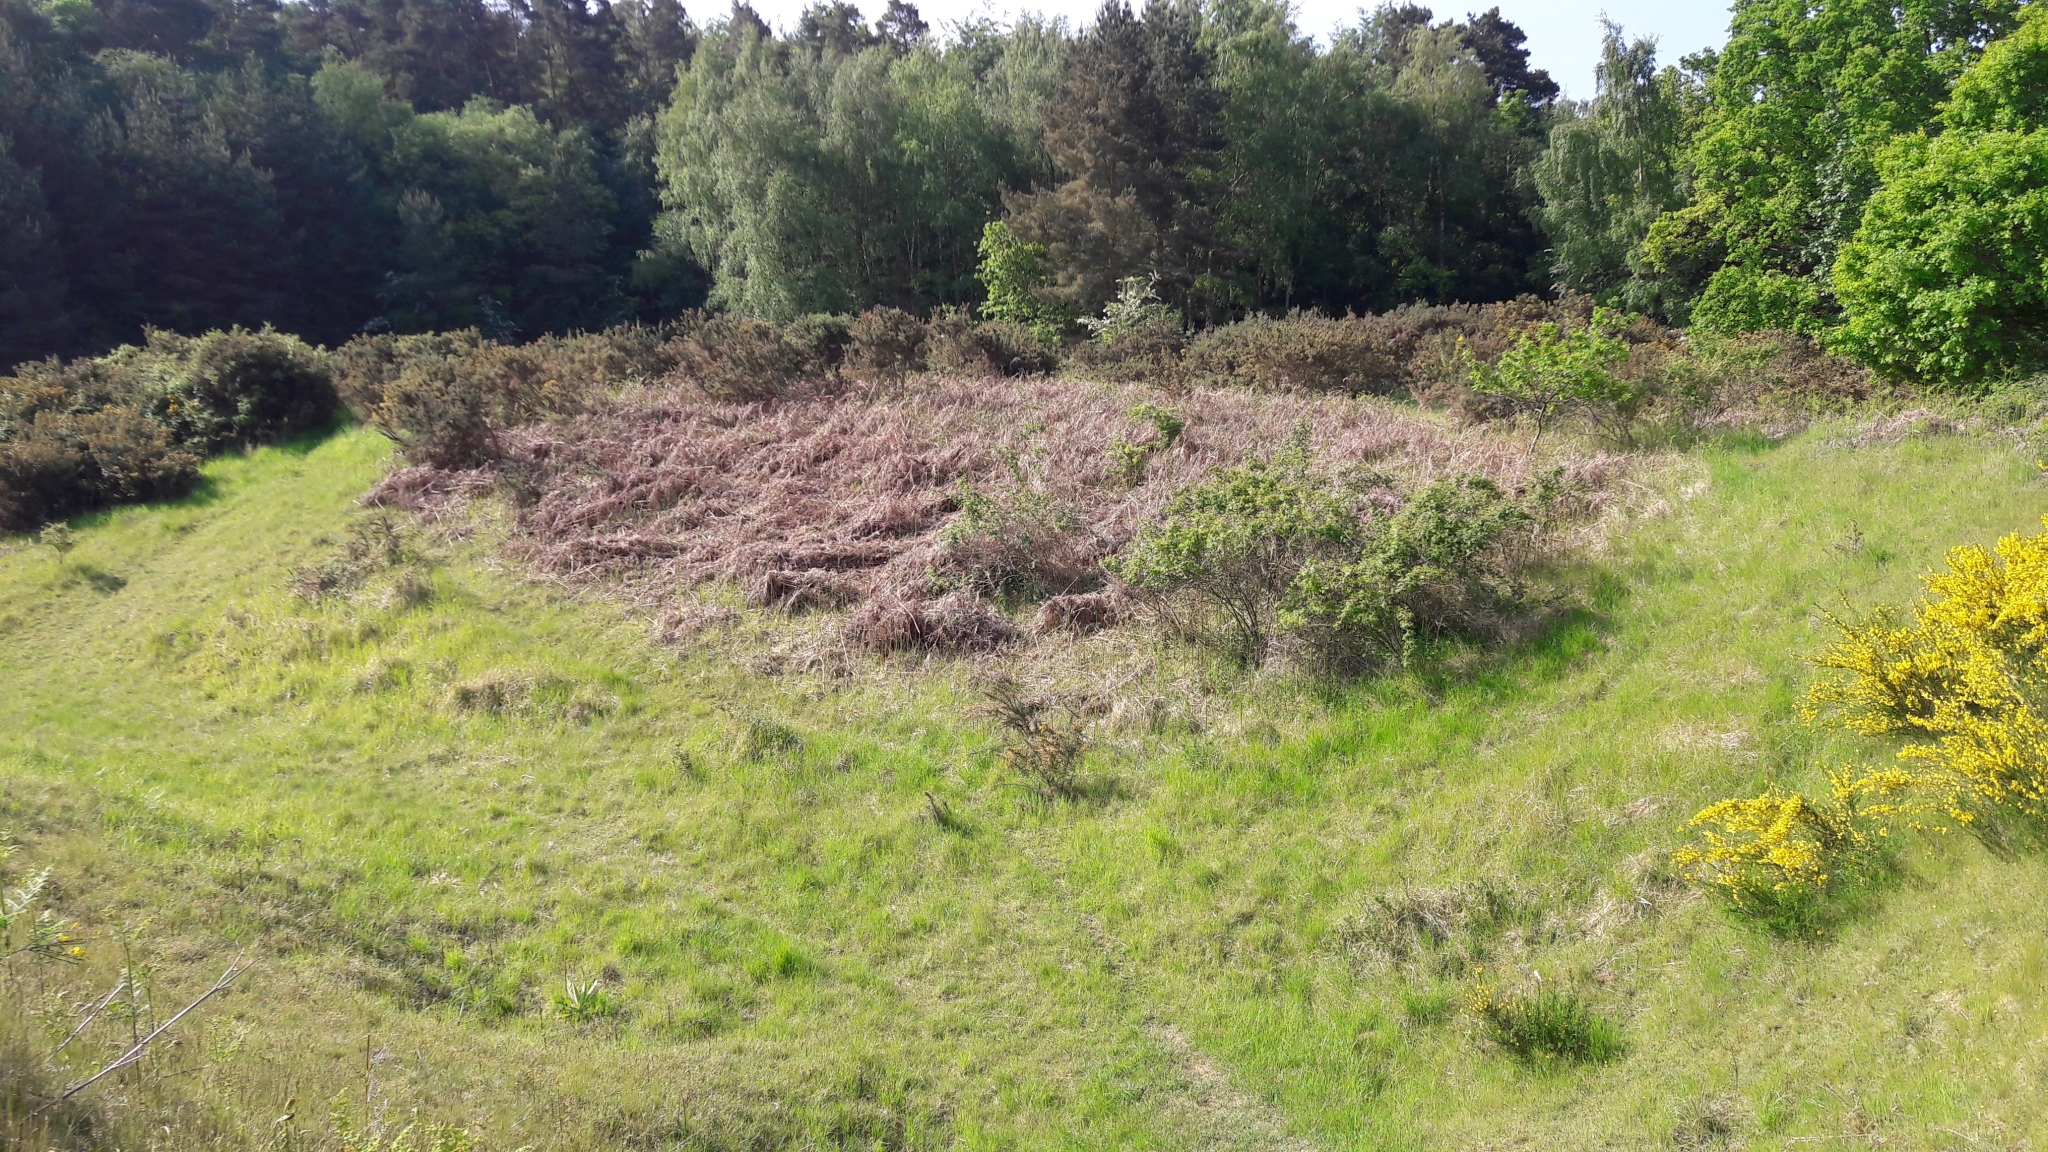 A photo from the FoTF Conservation Event - May 2018 - Open Day preparations at Mildenhall Mugwort Pits & Mildenhall Warren Lodge : A view across one of the Mugworts pits